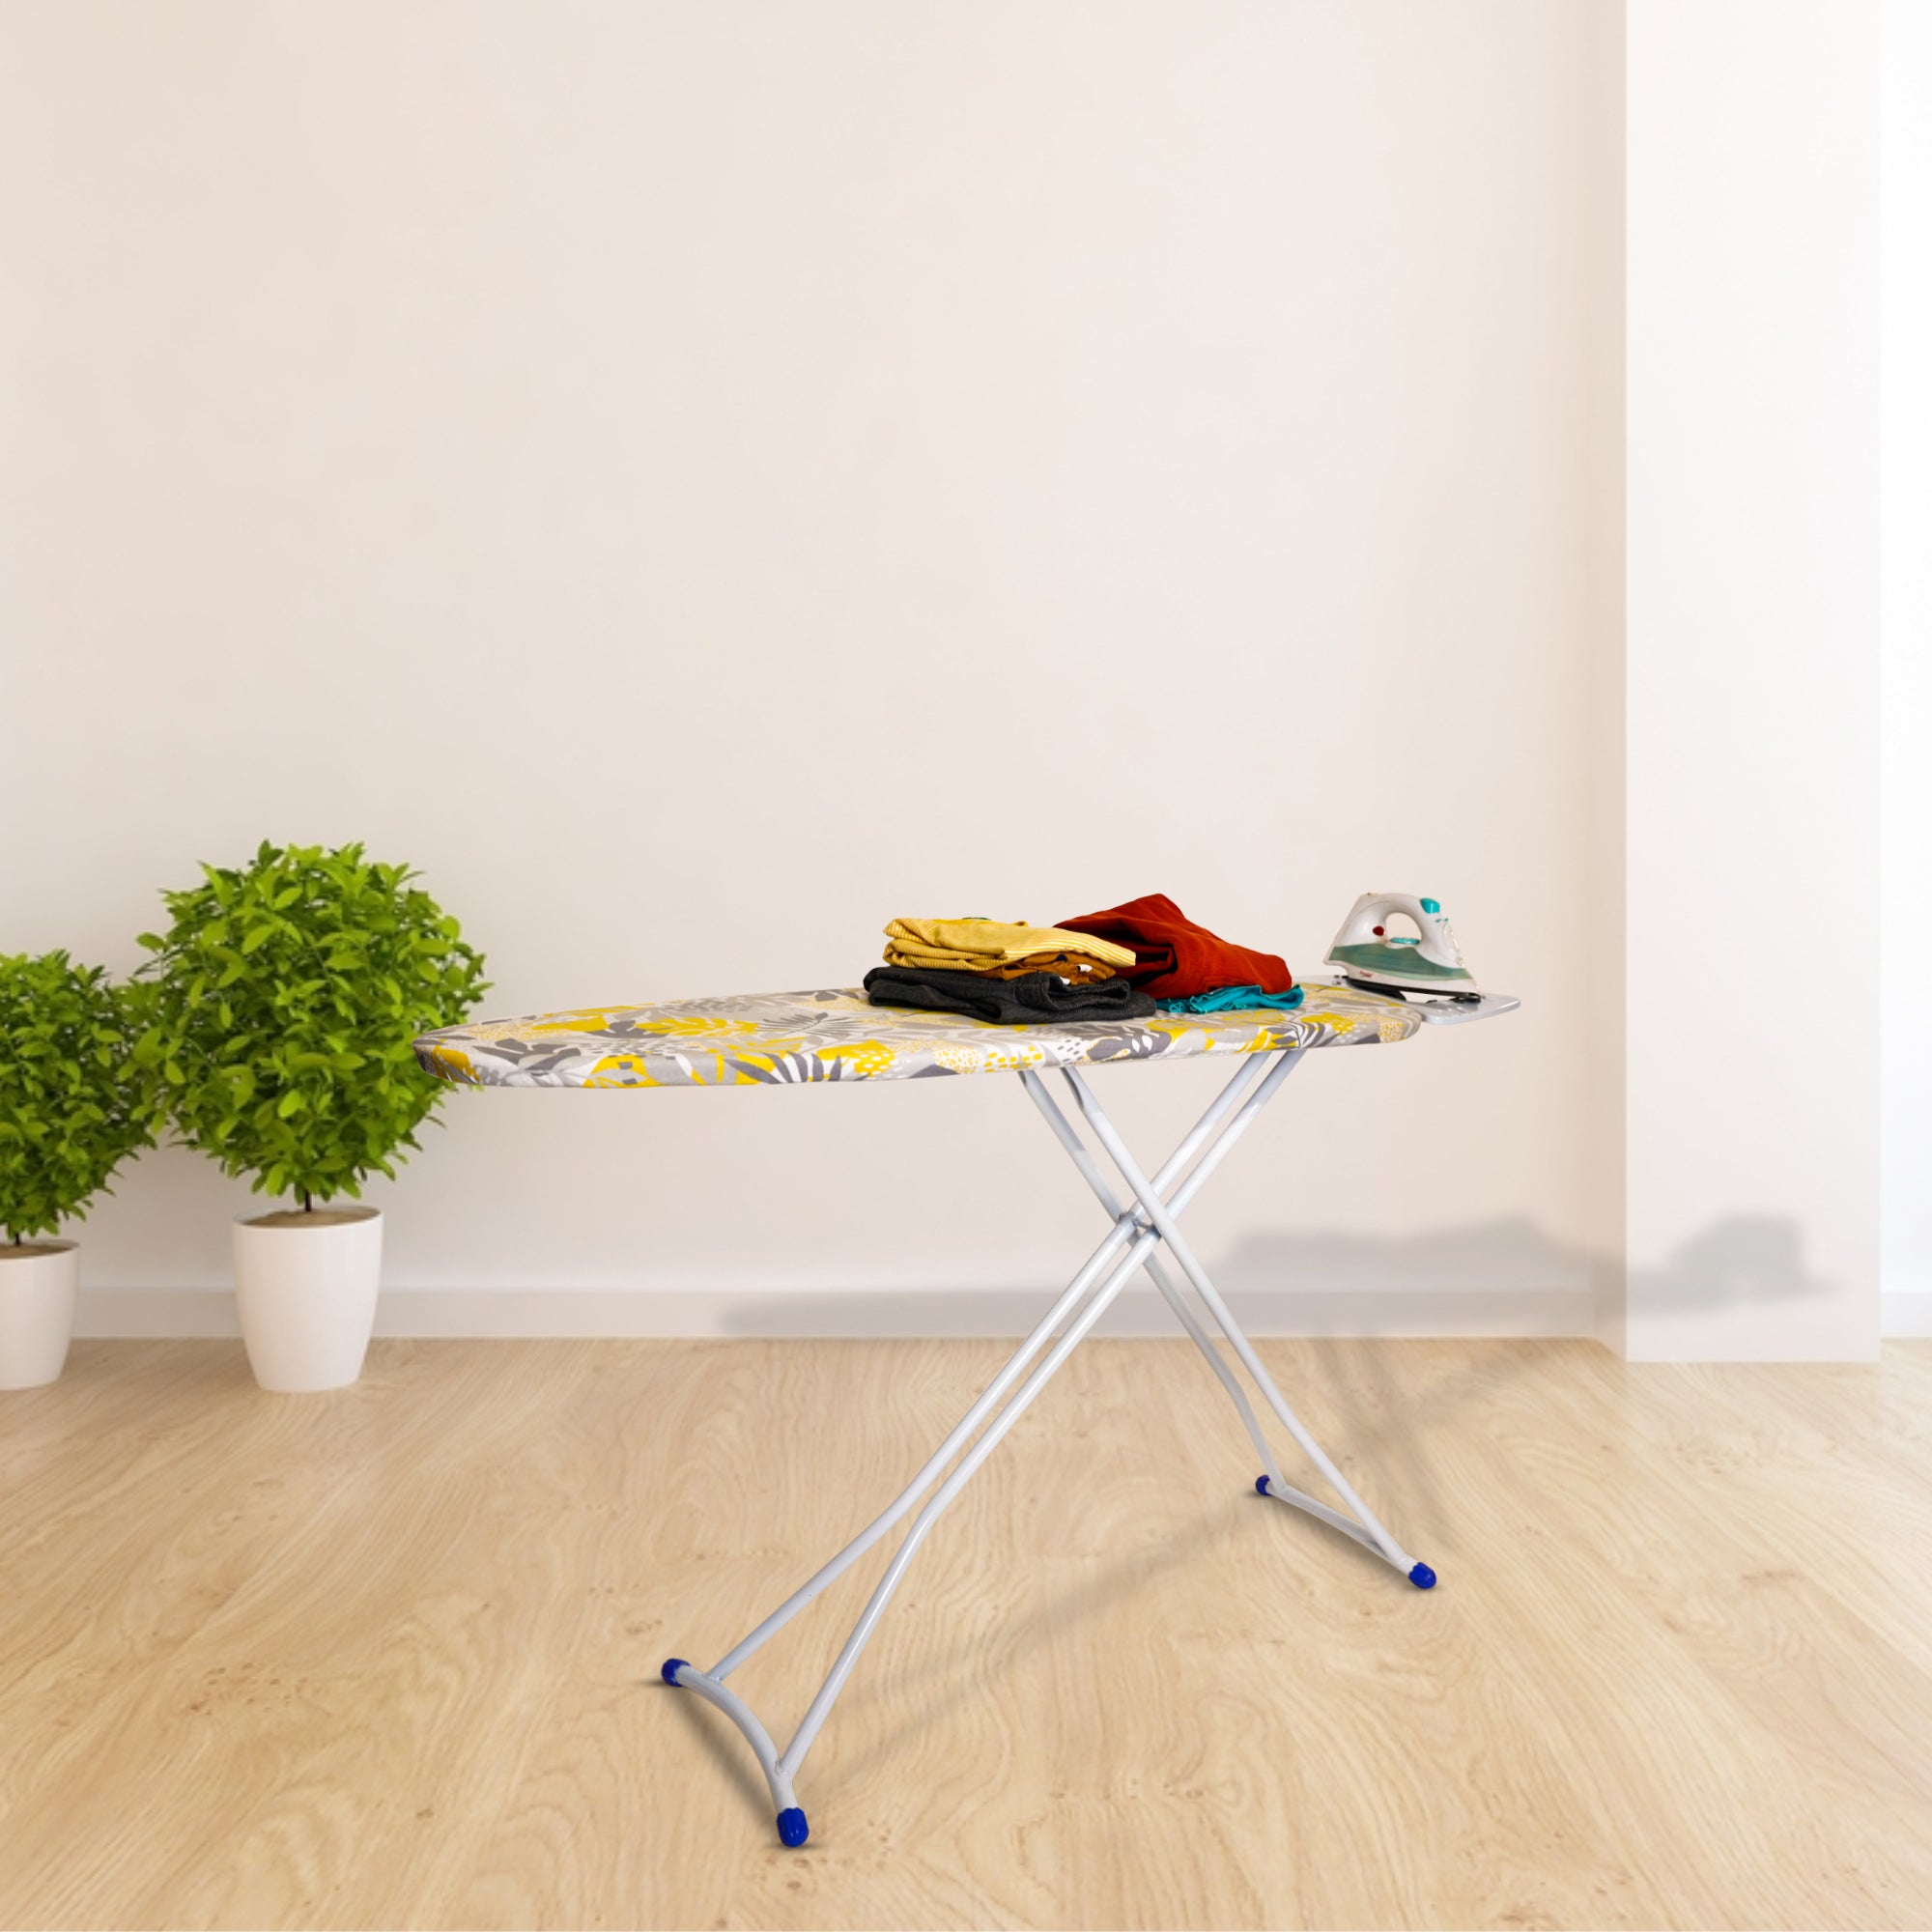 Adjustable Bloom Ironing Stand | H-Leg New Ironing Board with Silicone Iron Rest, Floral